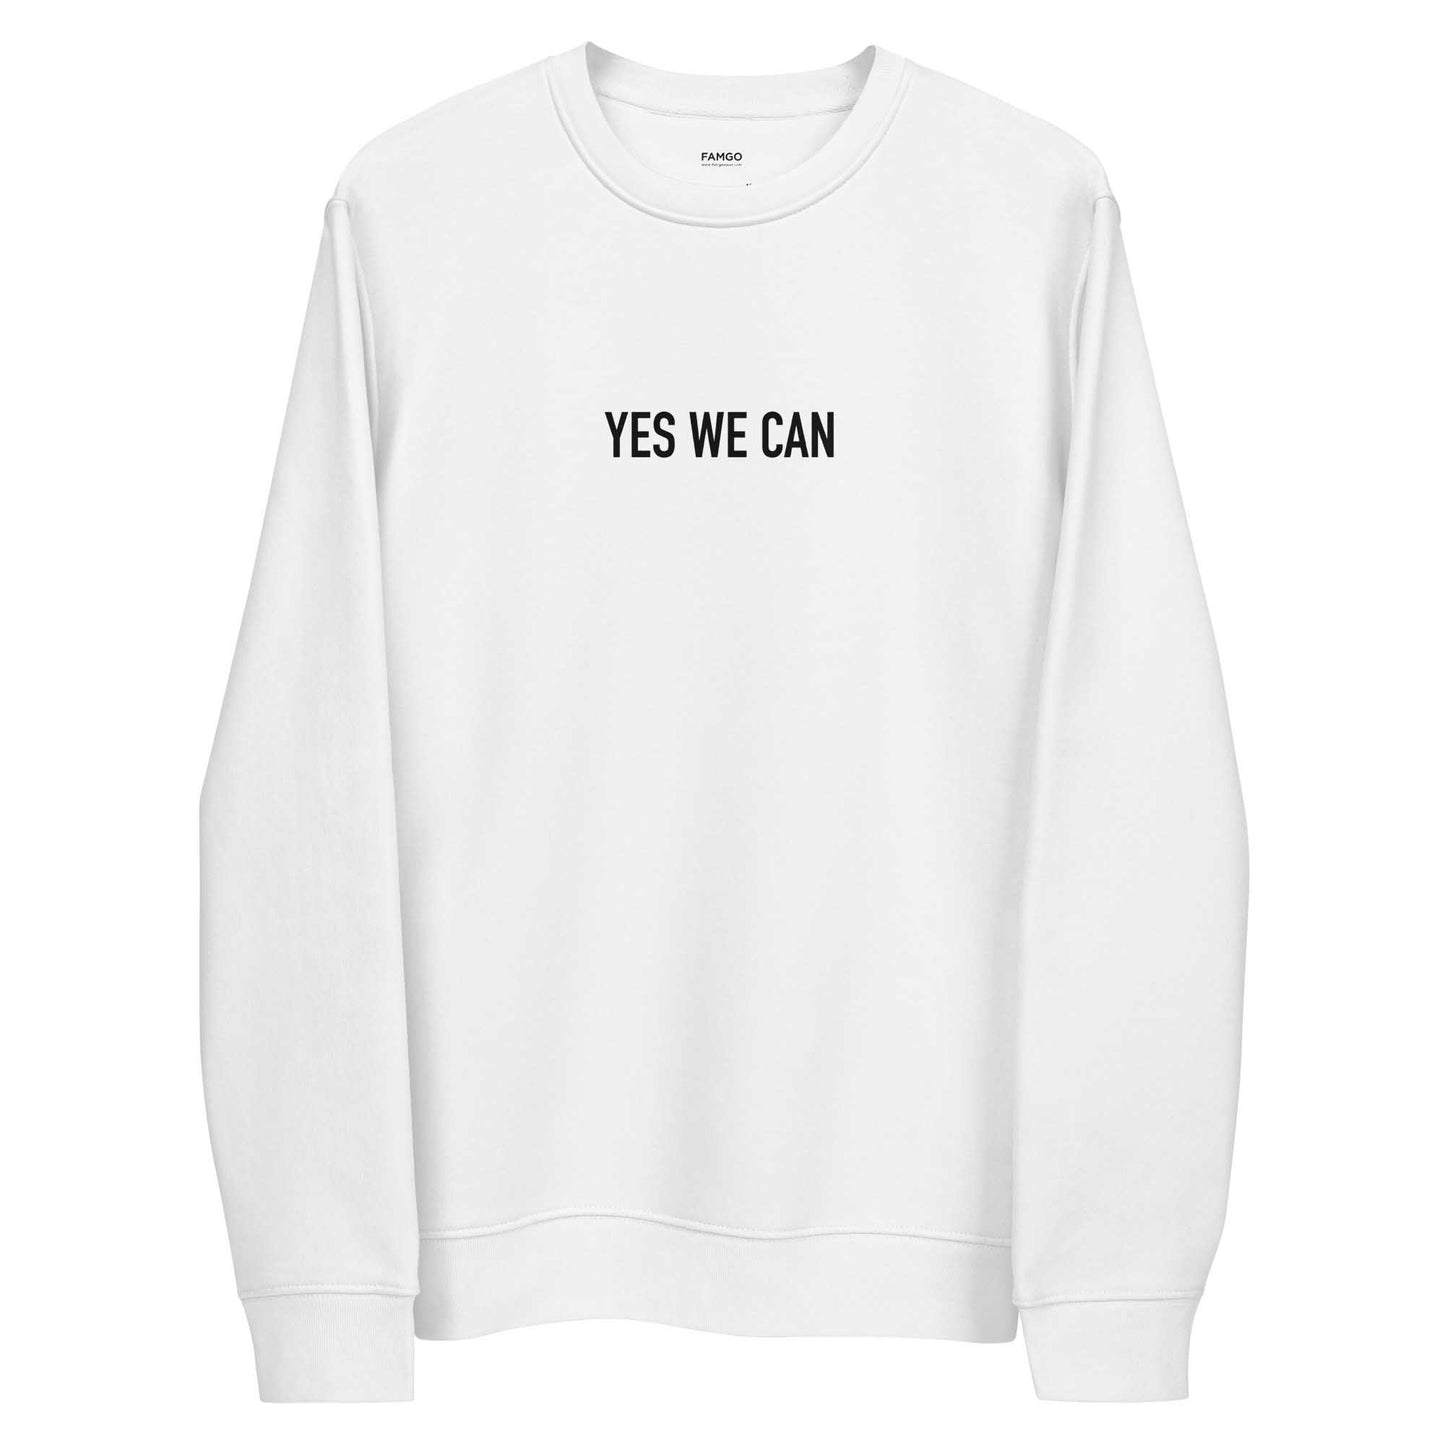 Women white positive sweatshirt with Barack Obama's inspirational quote, "Yes We Can." 